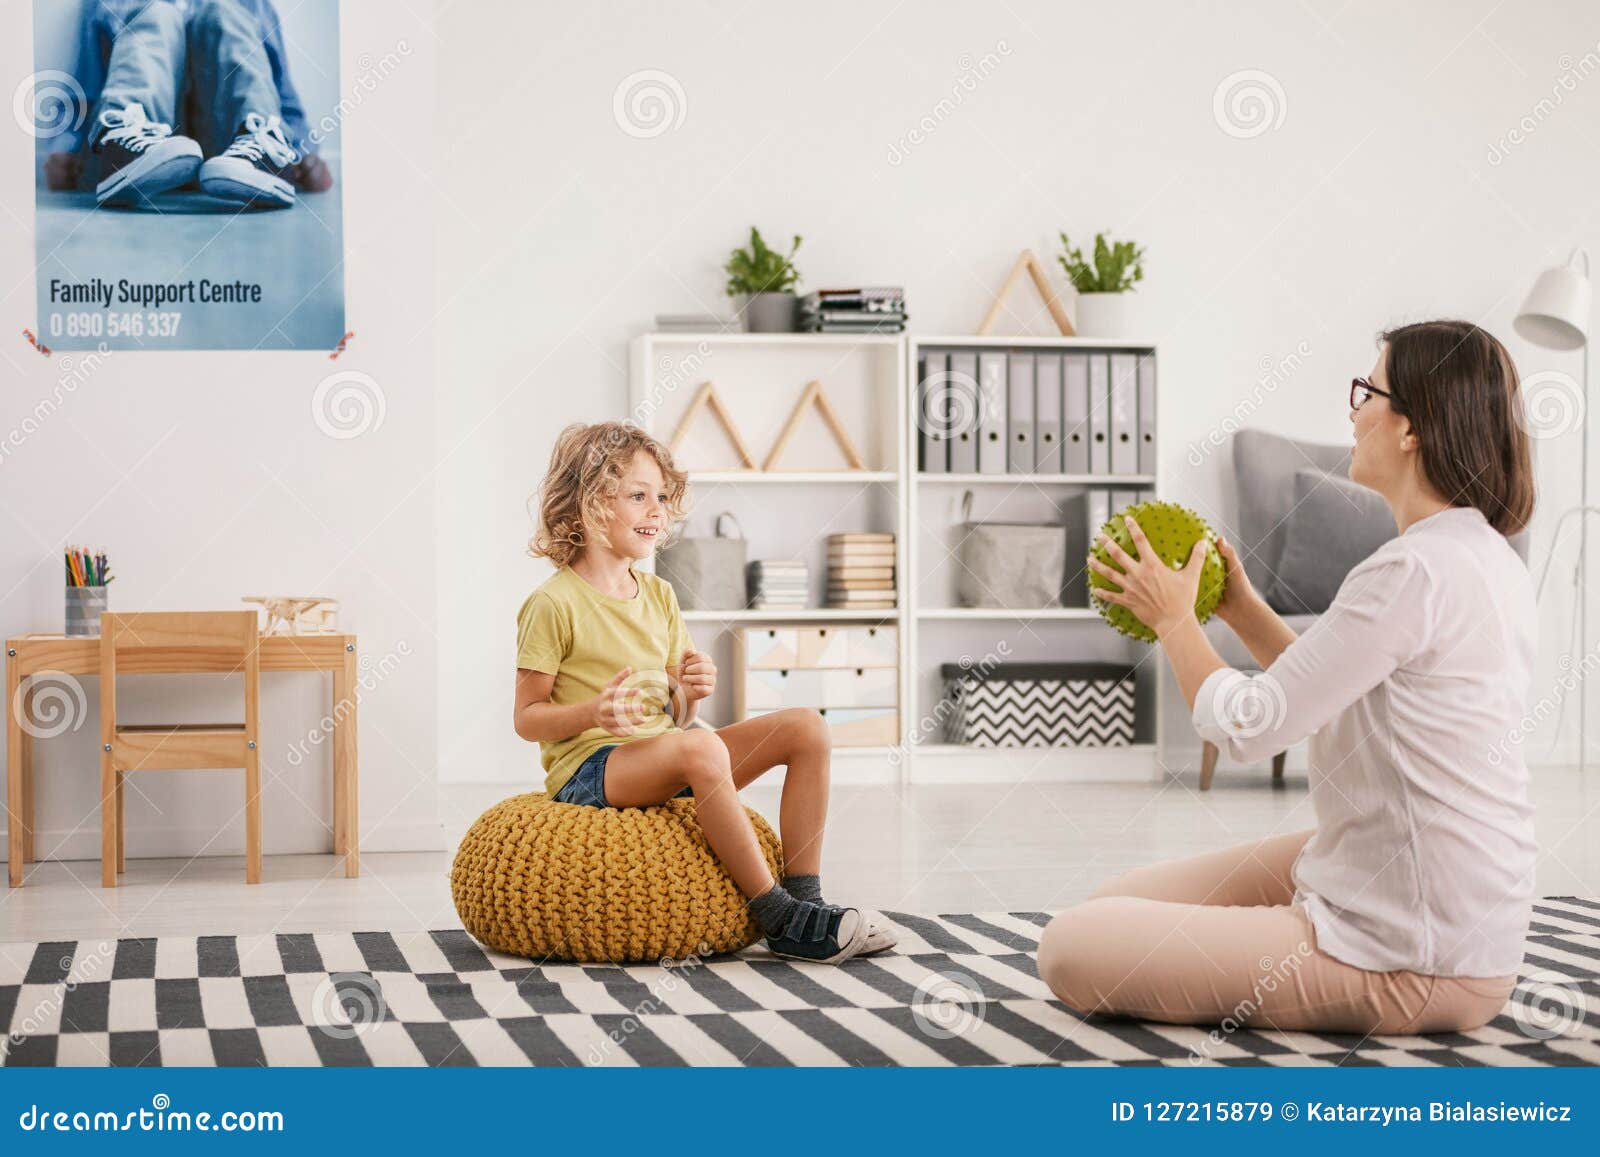 young female therapist playing with a happy orphaned boy during